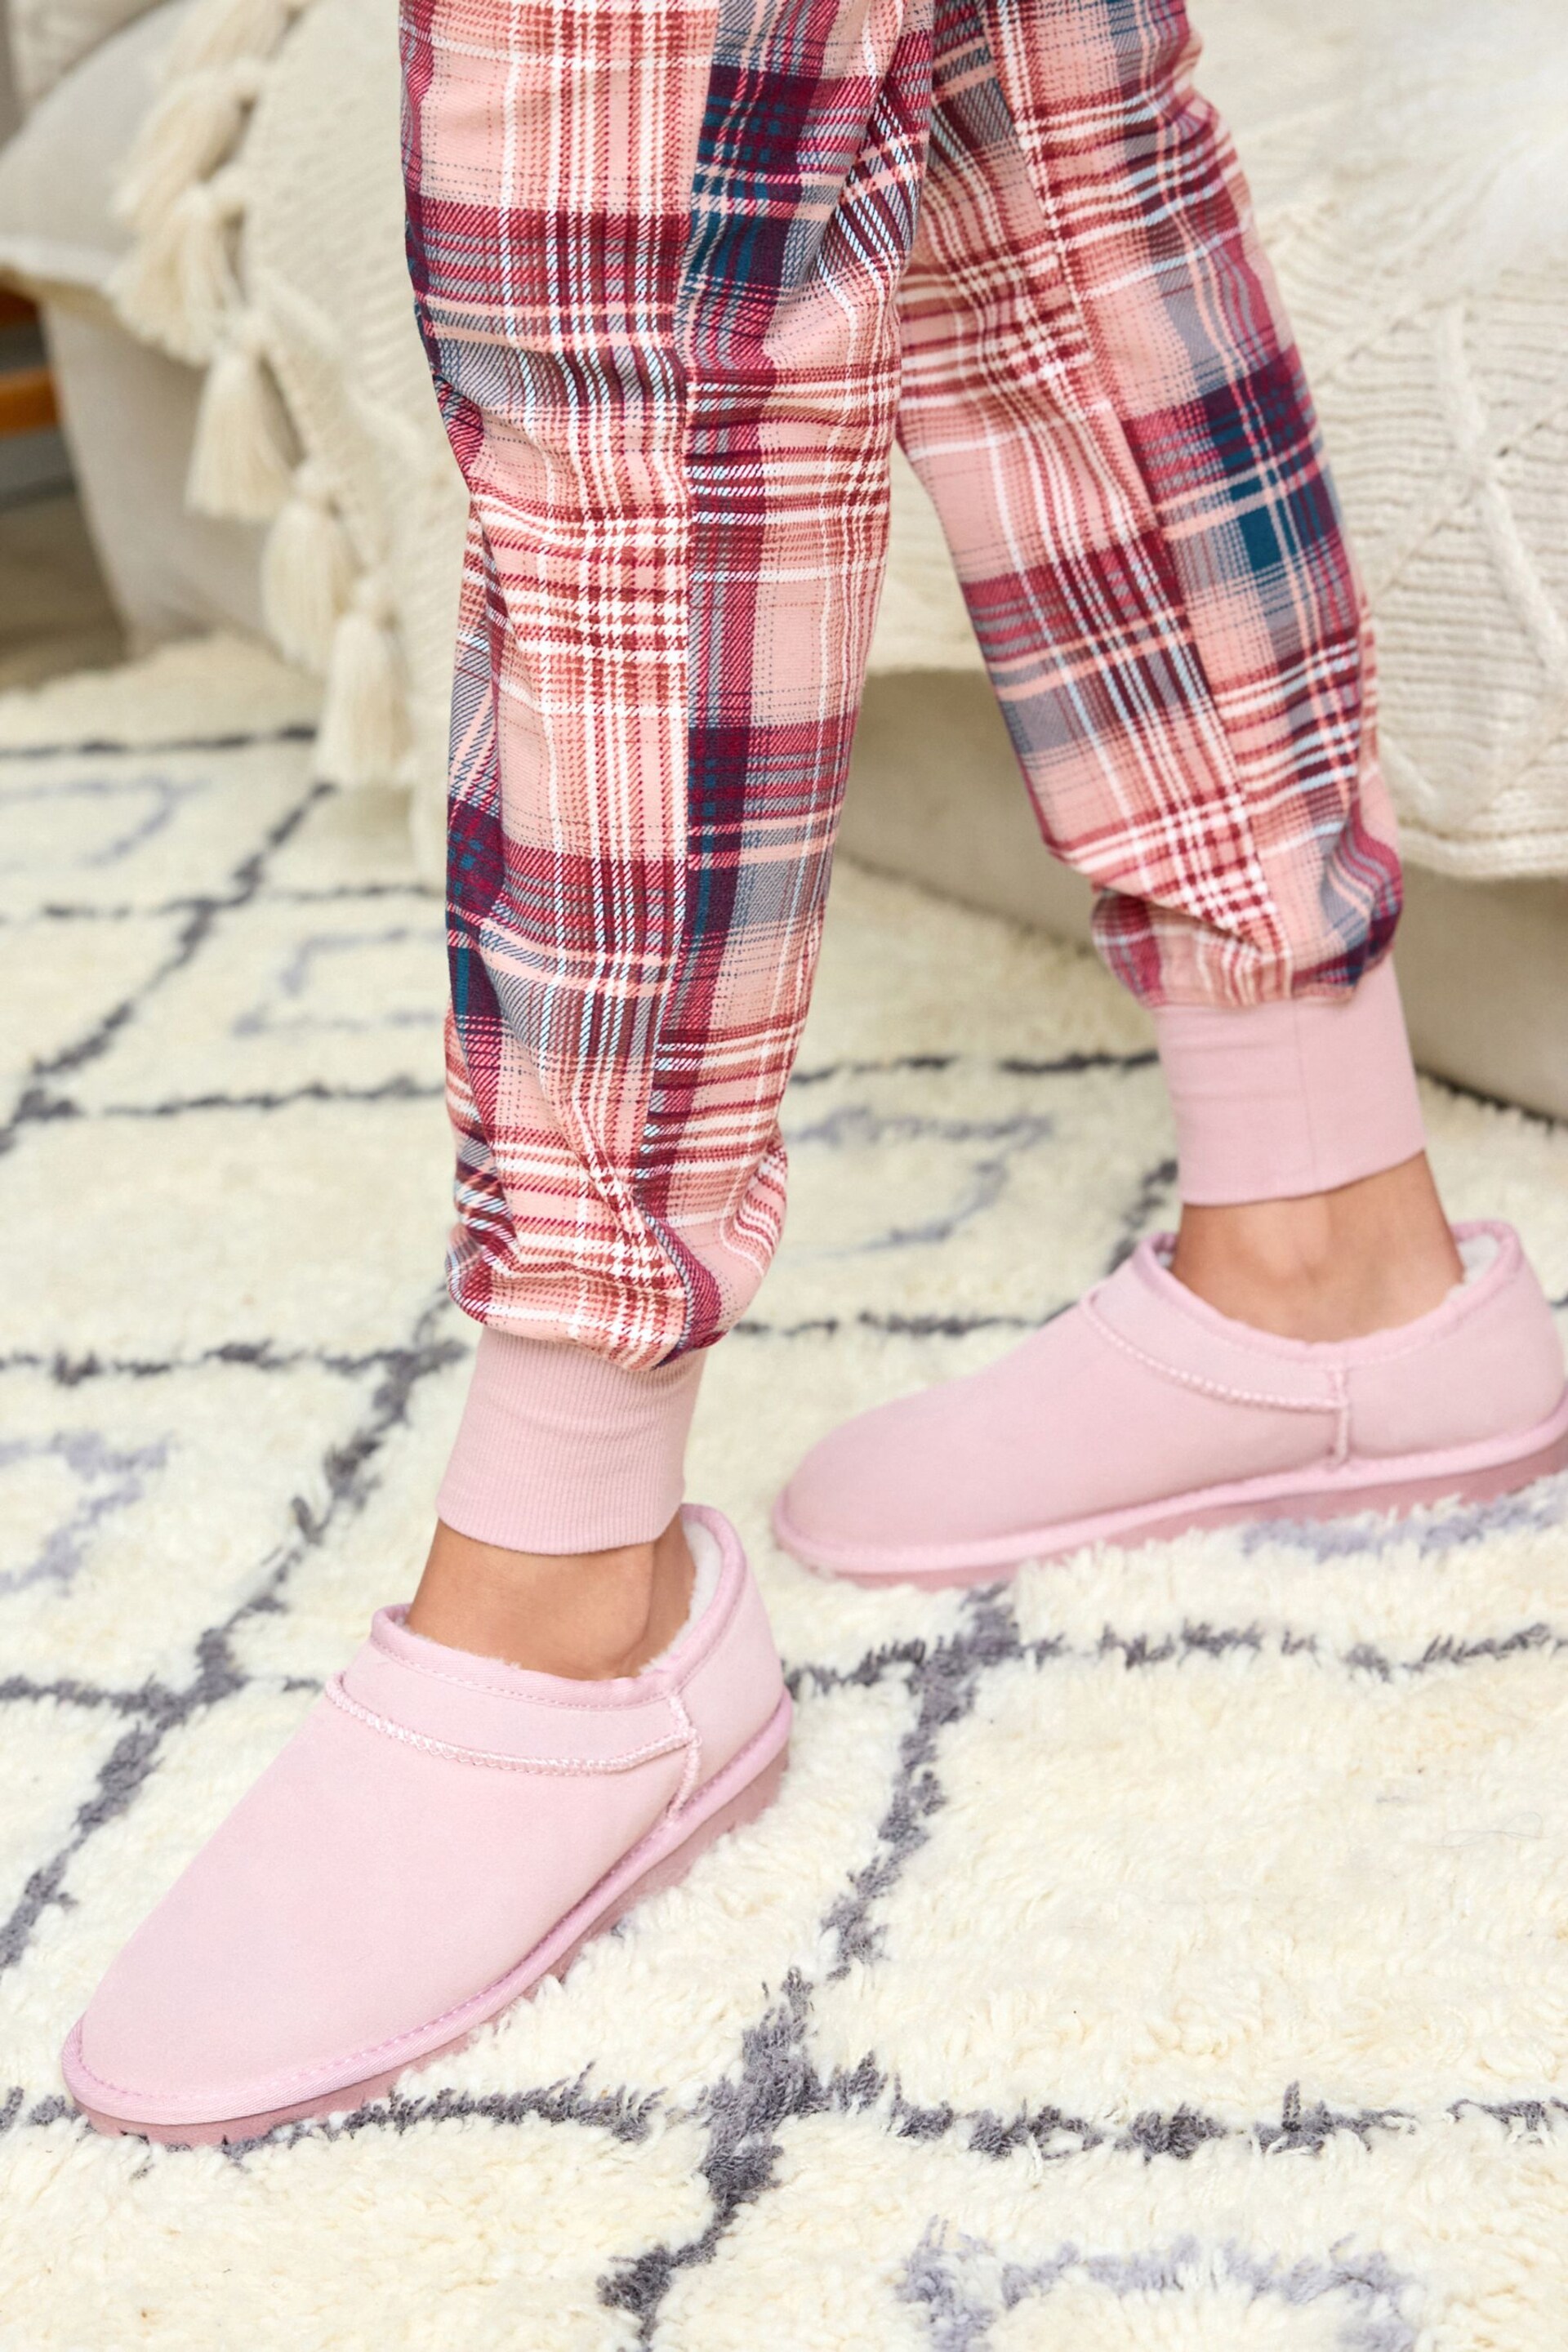 Pink Suede Shoot Slippers - Image 2 of 8